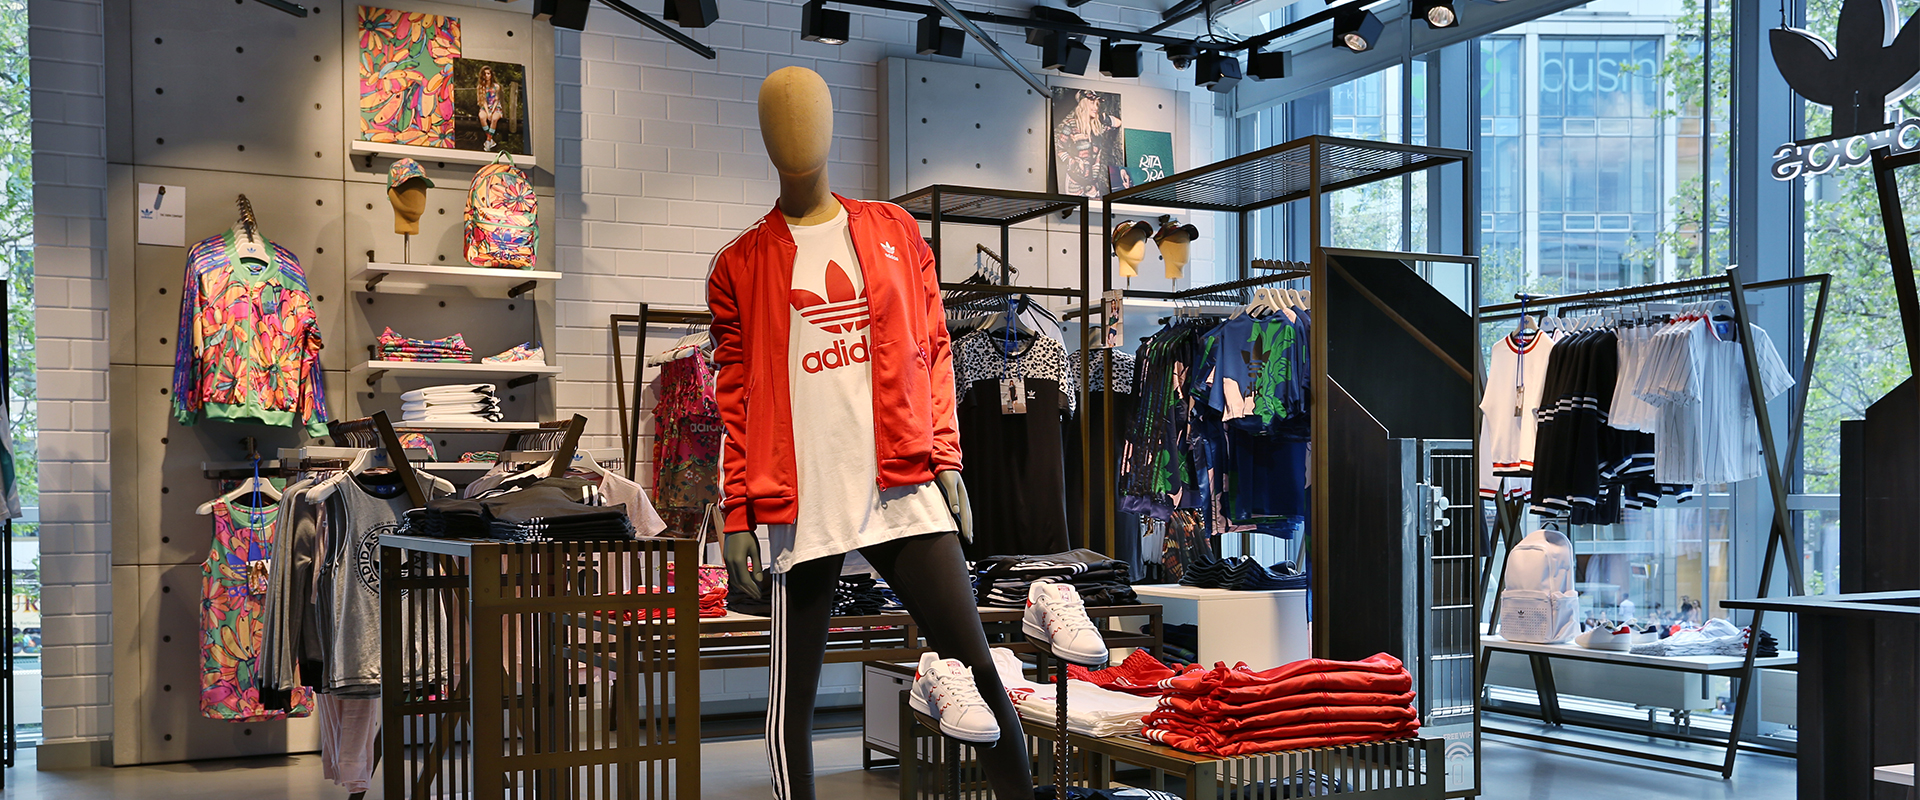 adidas berlin outlet